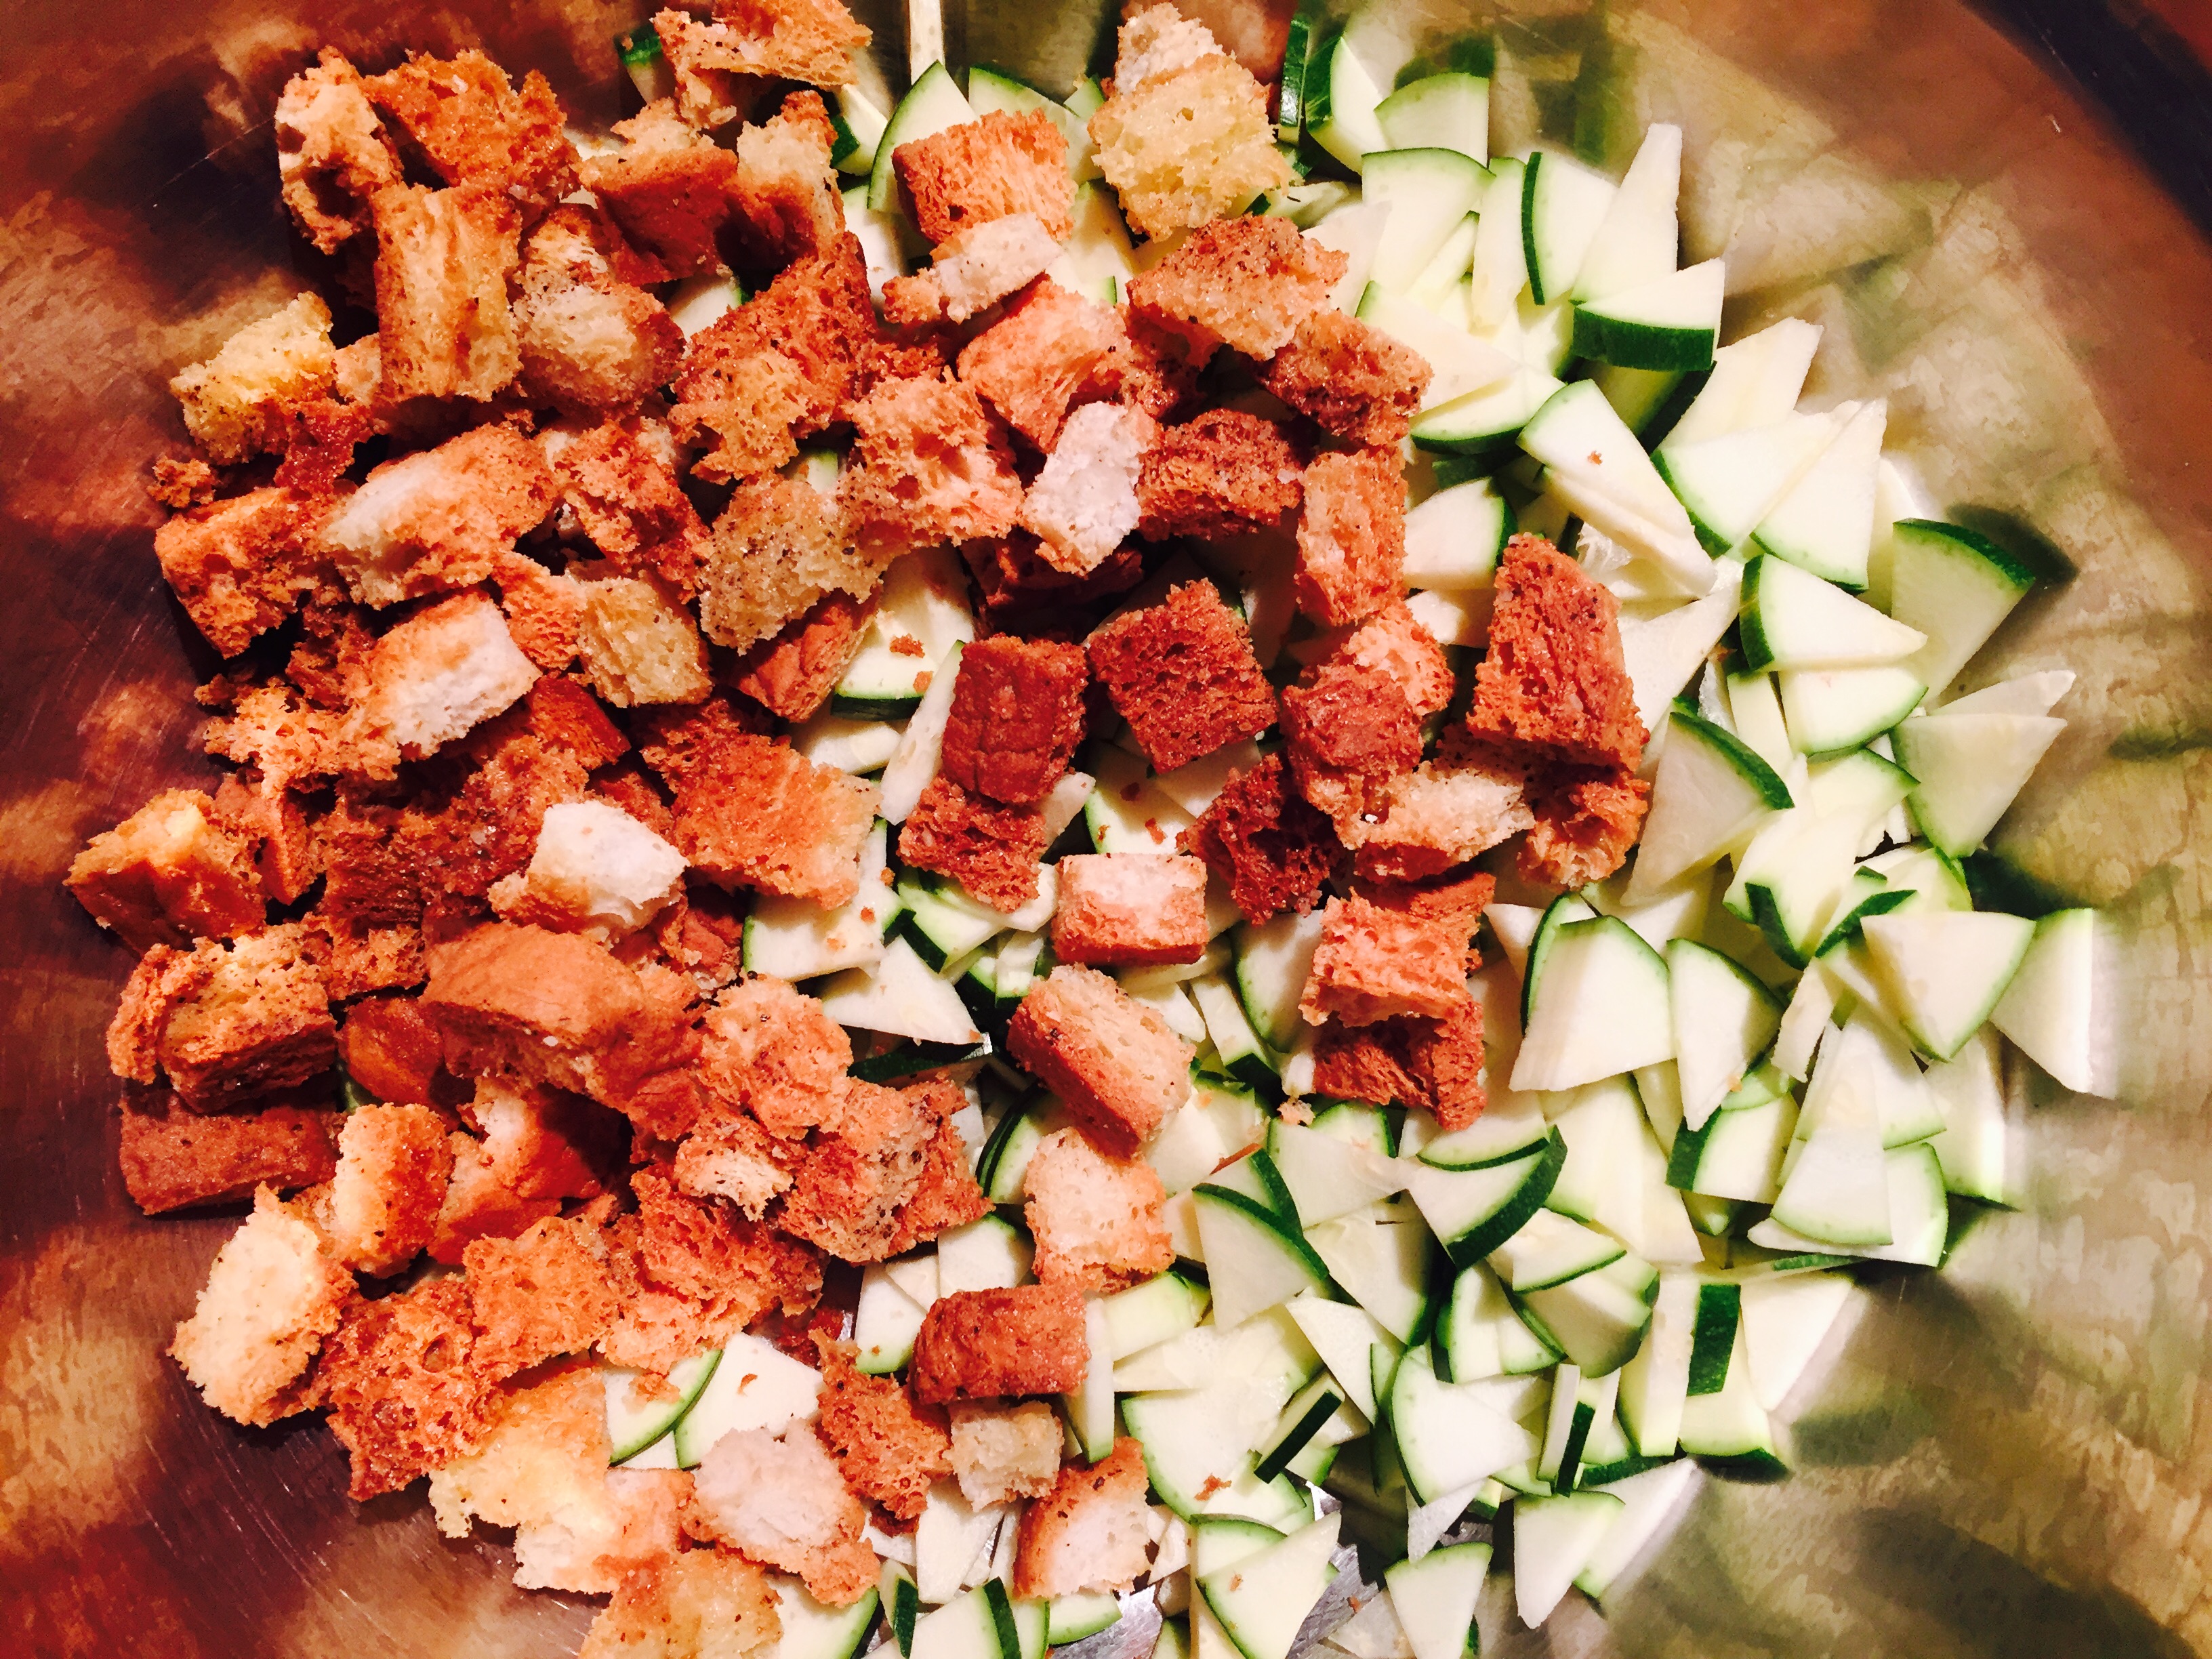 Chopped raw zucchini with home-made baked gluten free croutons